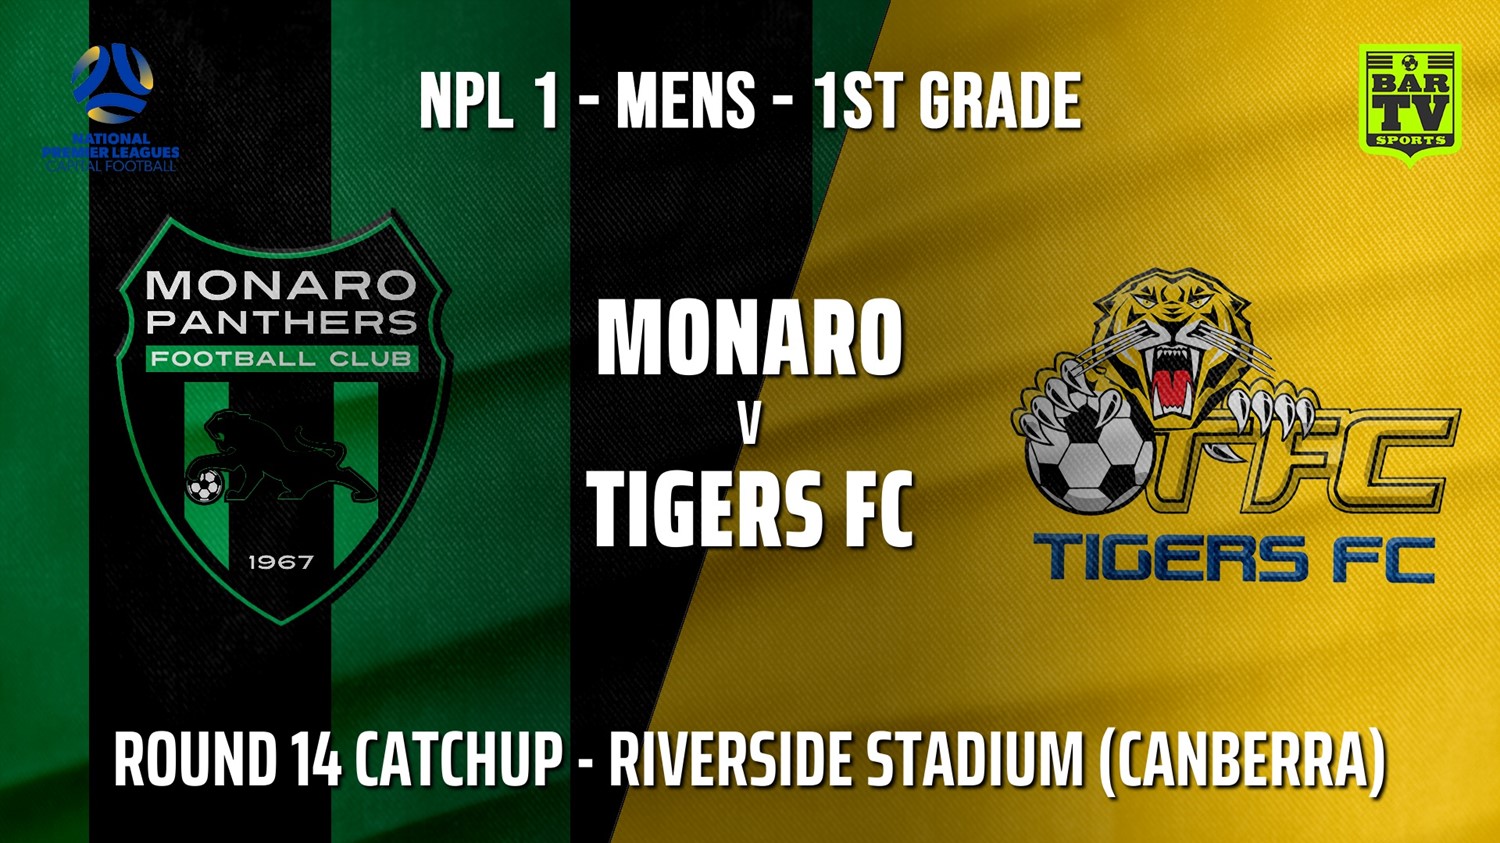 210811-Capital NPL Round 14 Catchup - Monaro Panthers FC v Tigers FC Minigame Slate Image